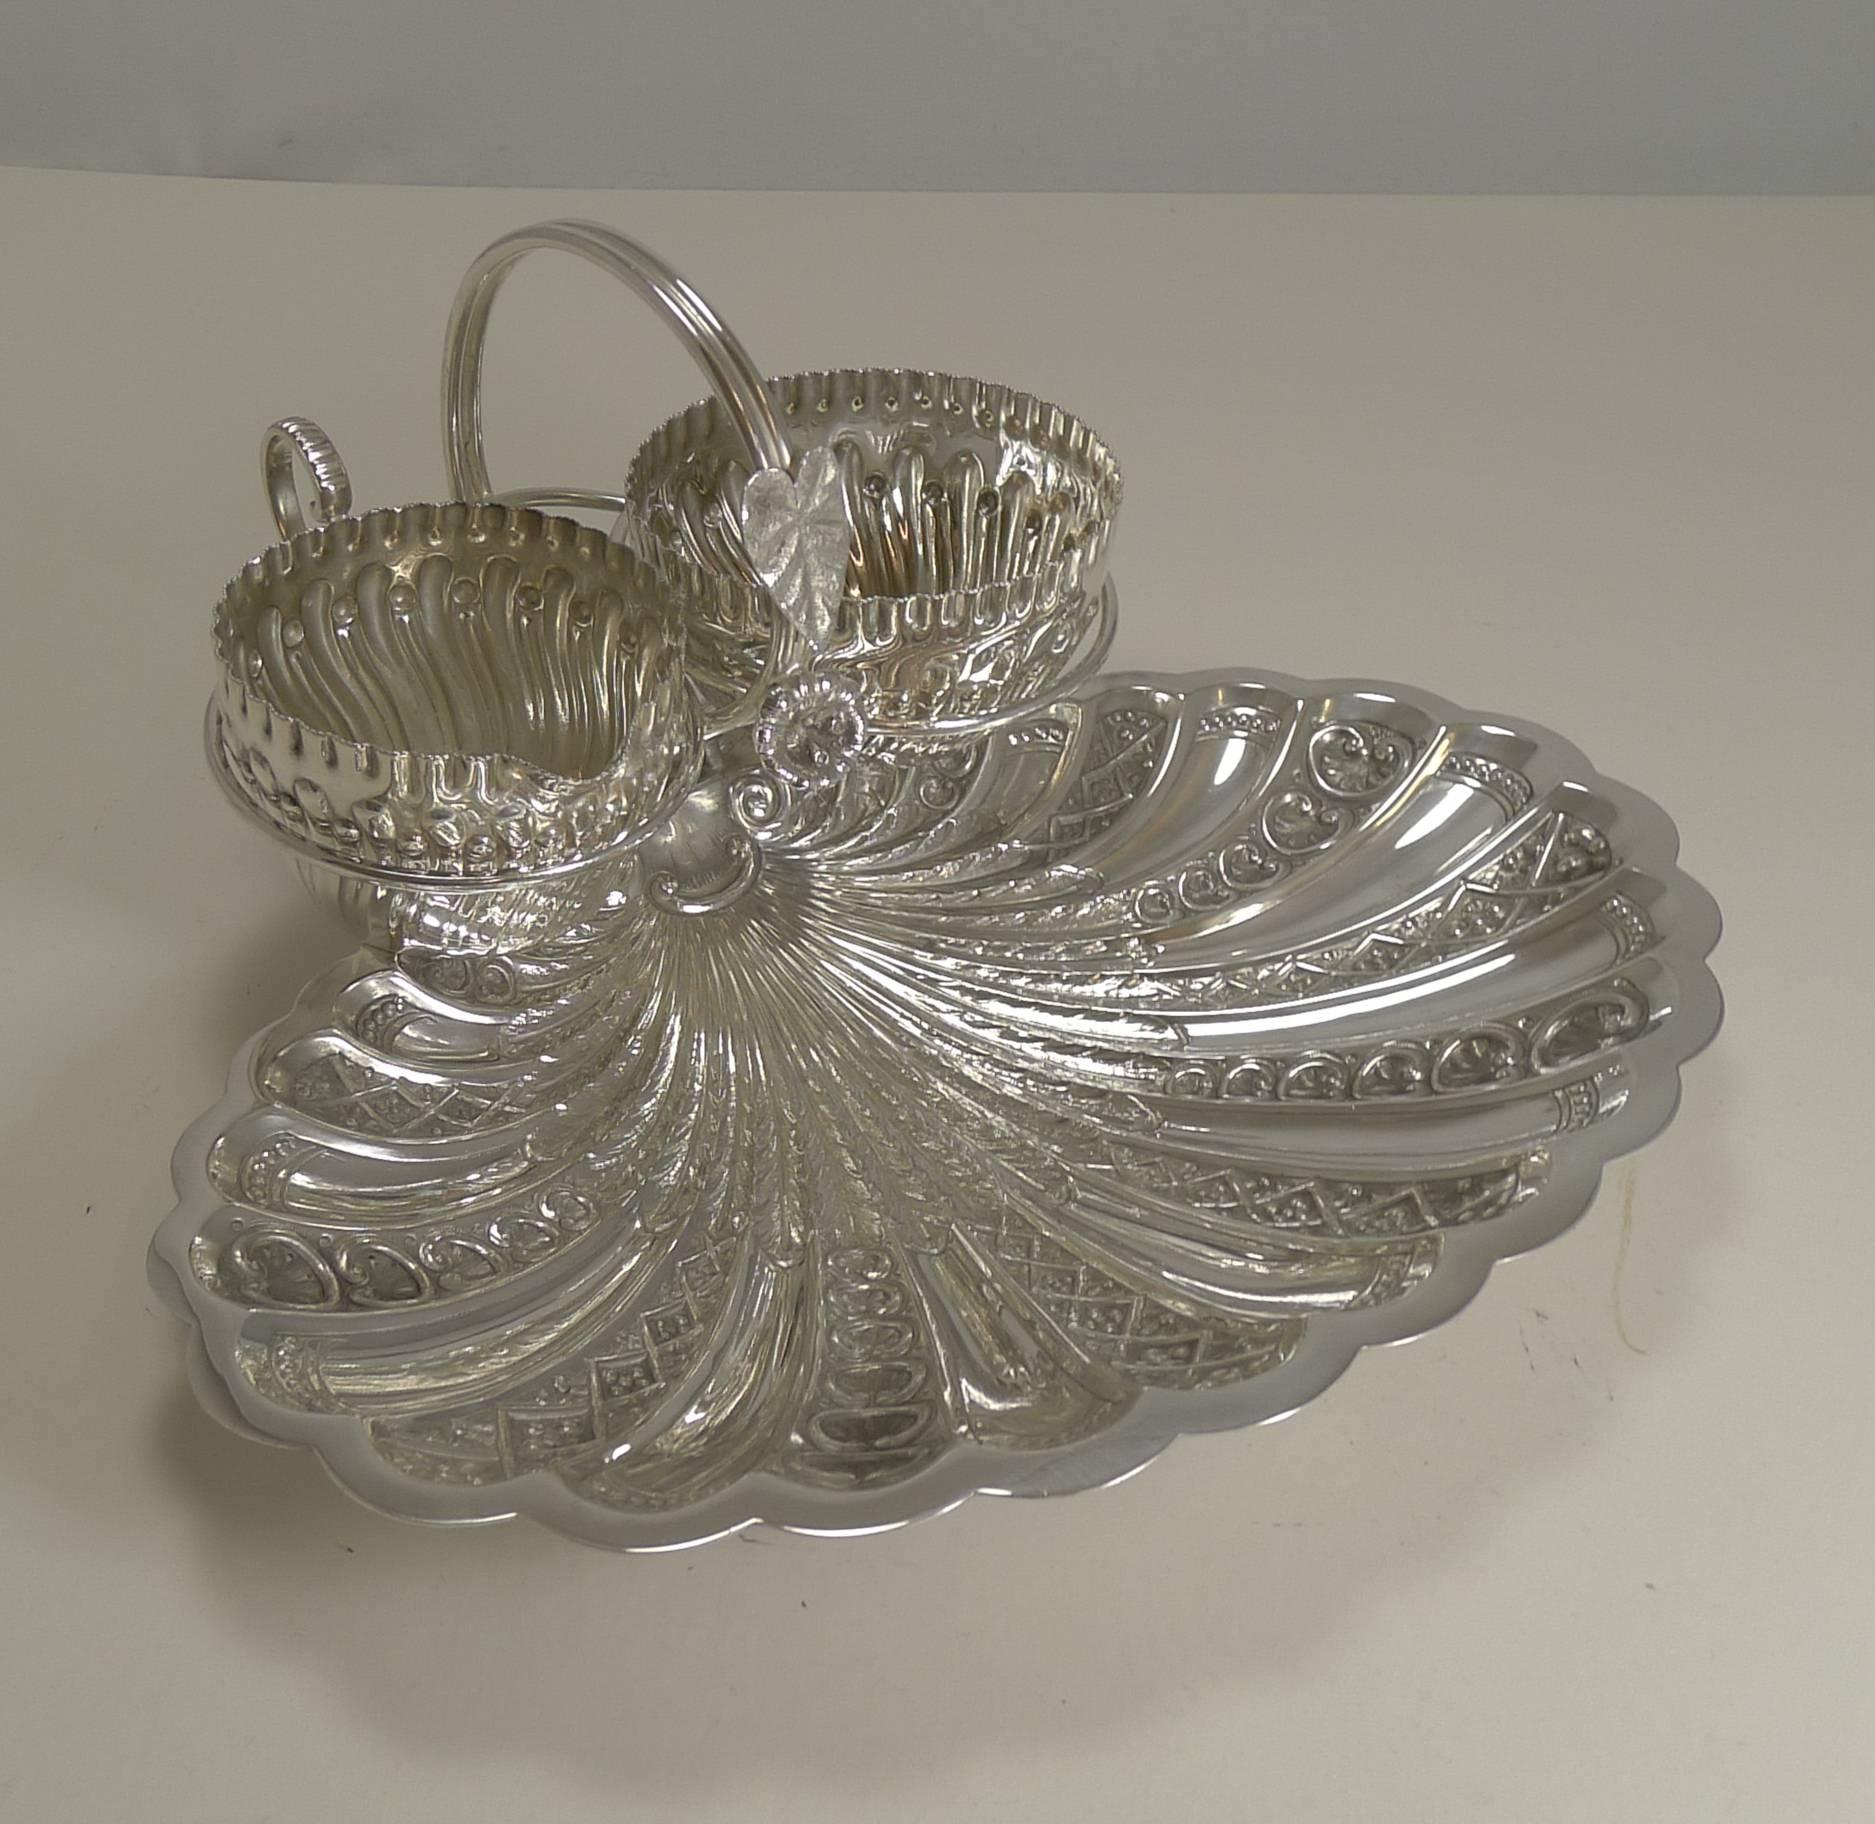 Antique English Silver Plated Strawberry Set by Roberts and Belk, circa 1900 For Sale 3